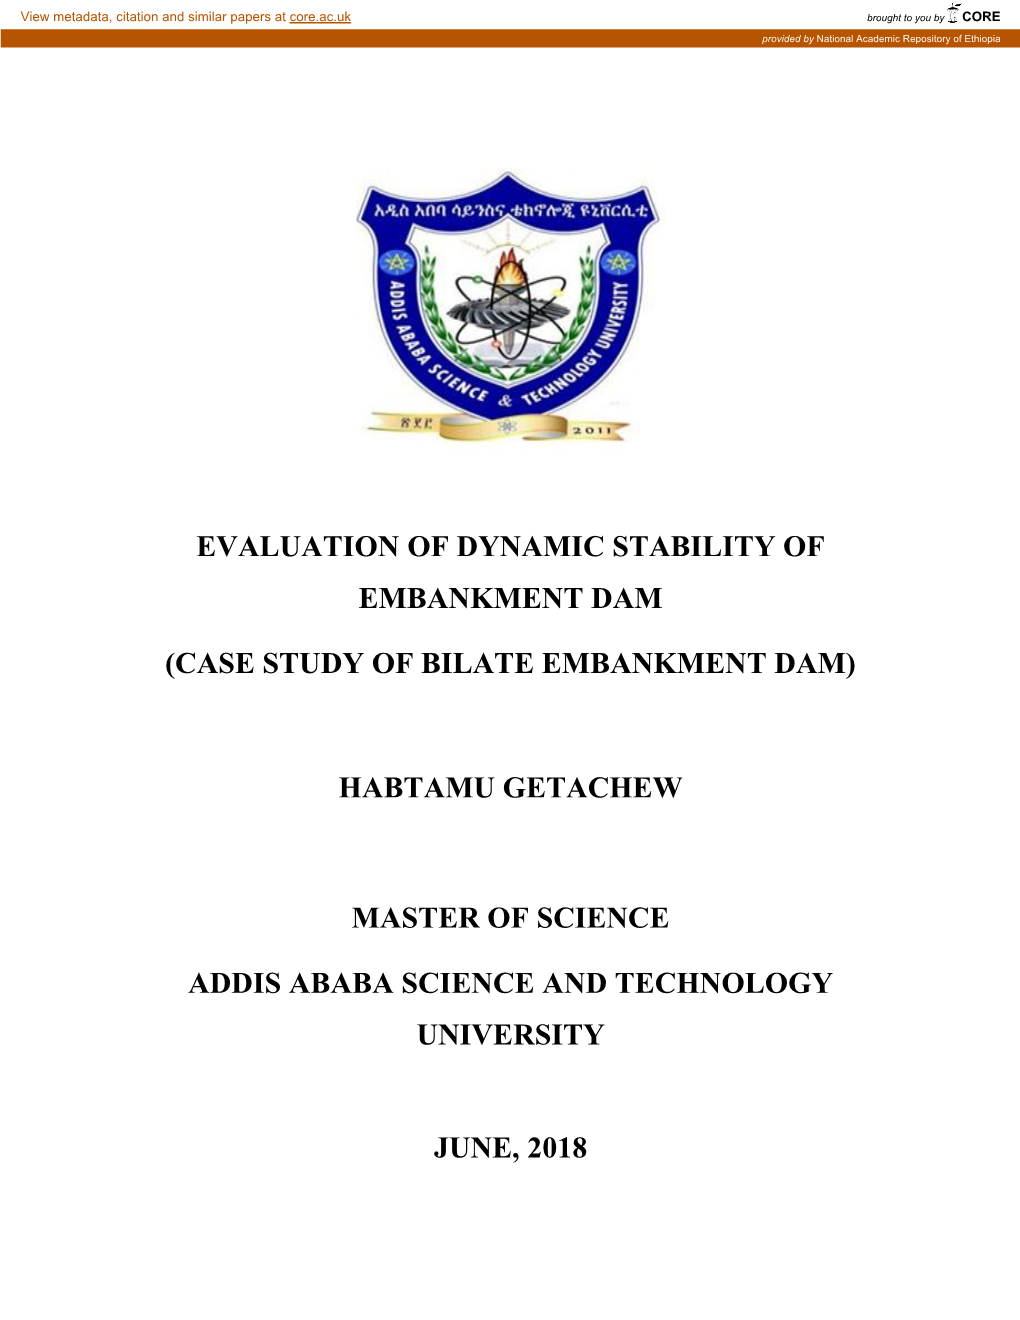 Evaluation of Dynamic Stability of Embankment Dam